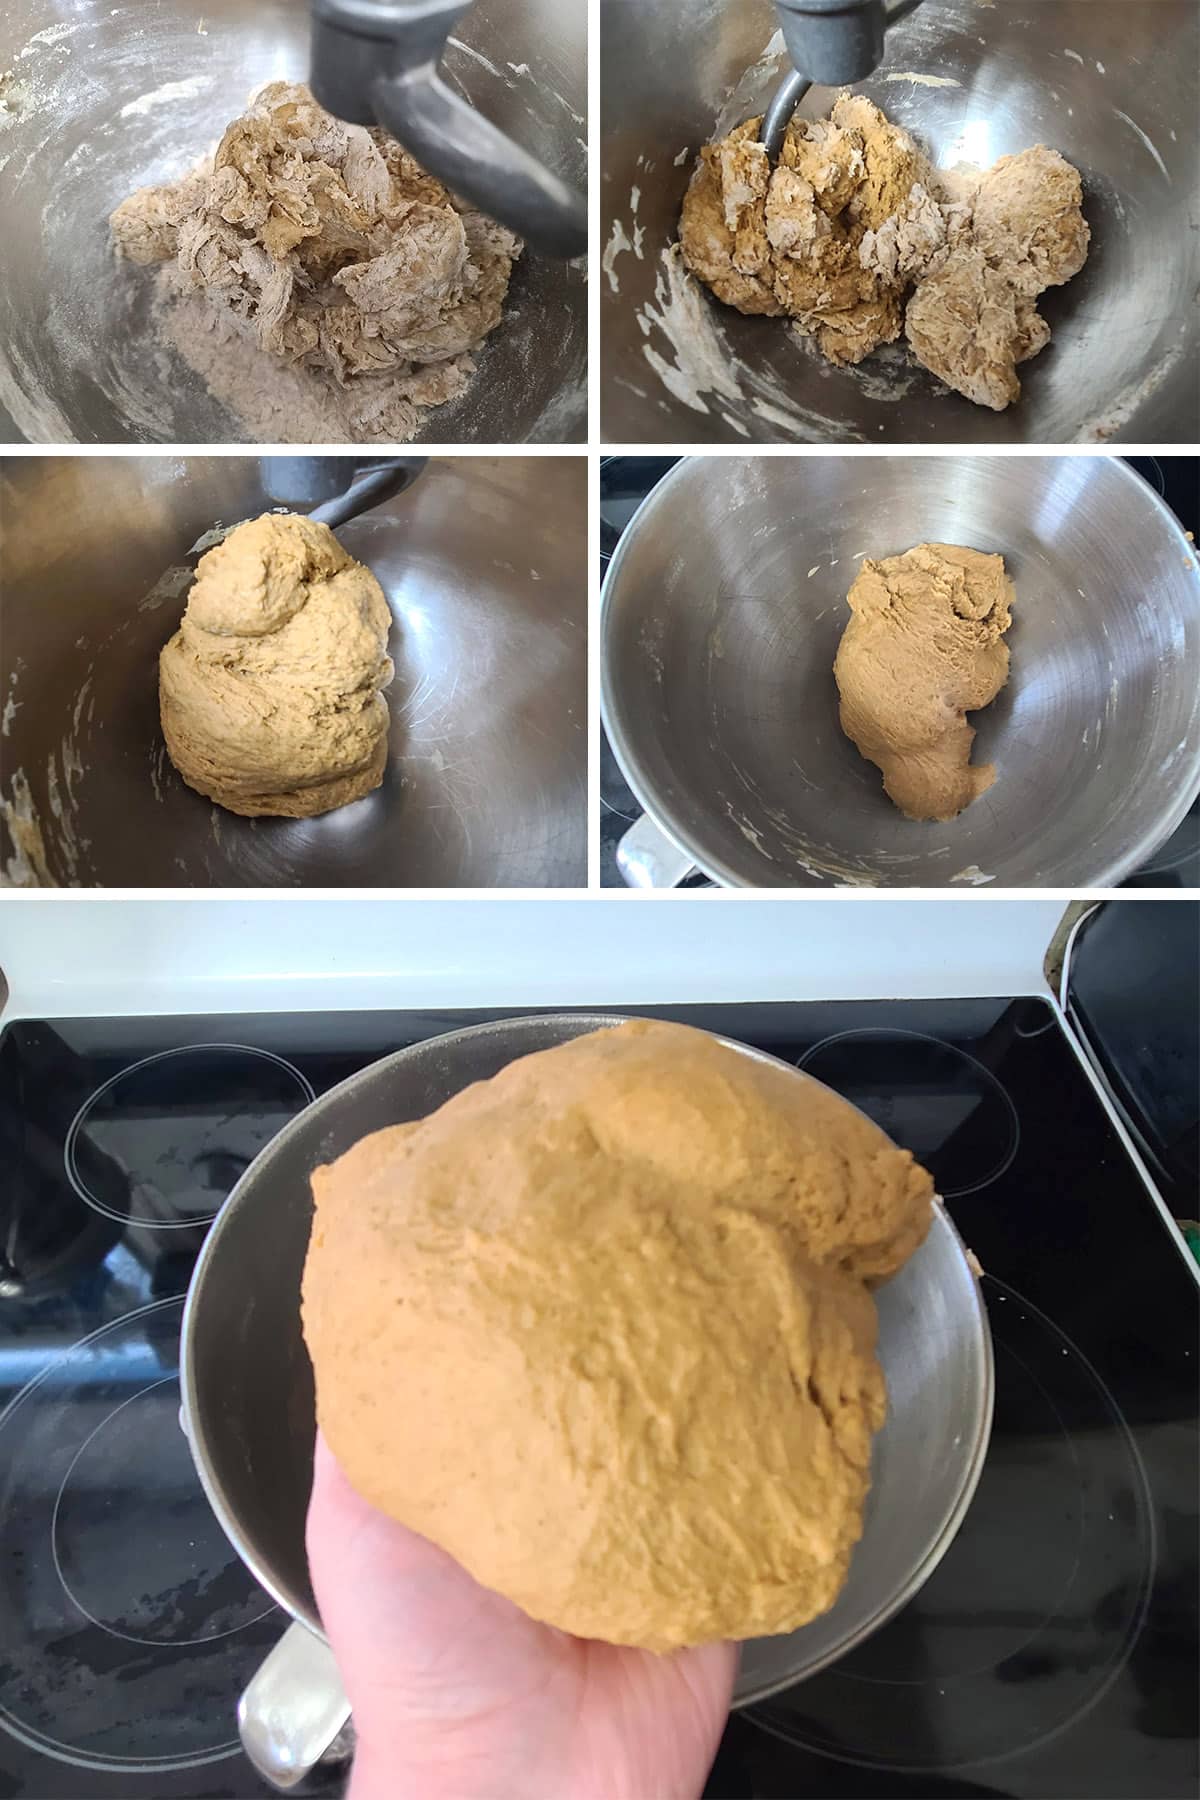 A 5 part image showing the dough at various stages of kneading, ending as a smooth ball.